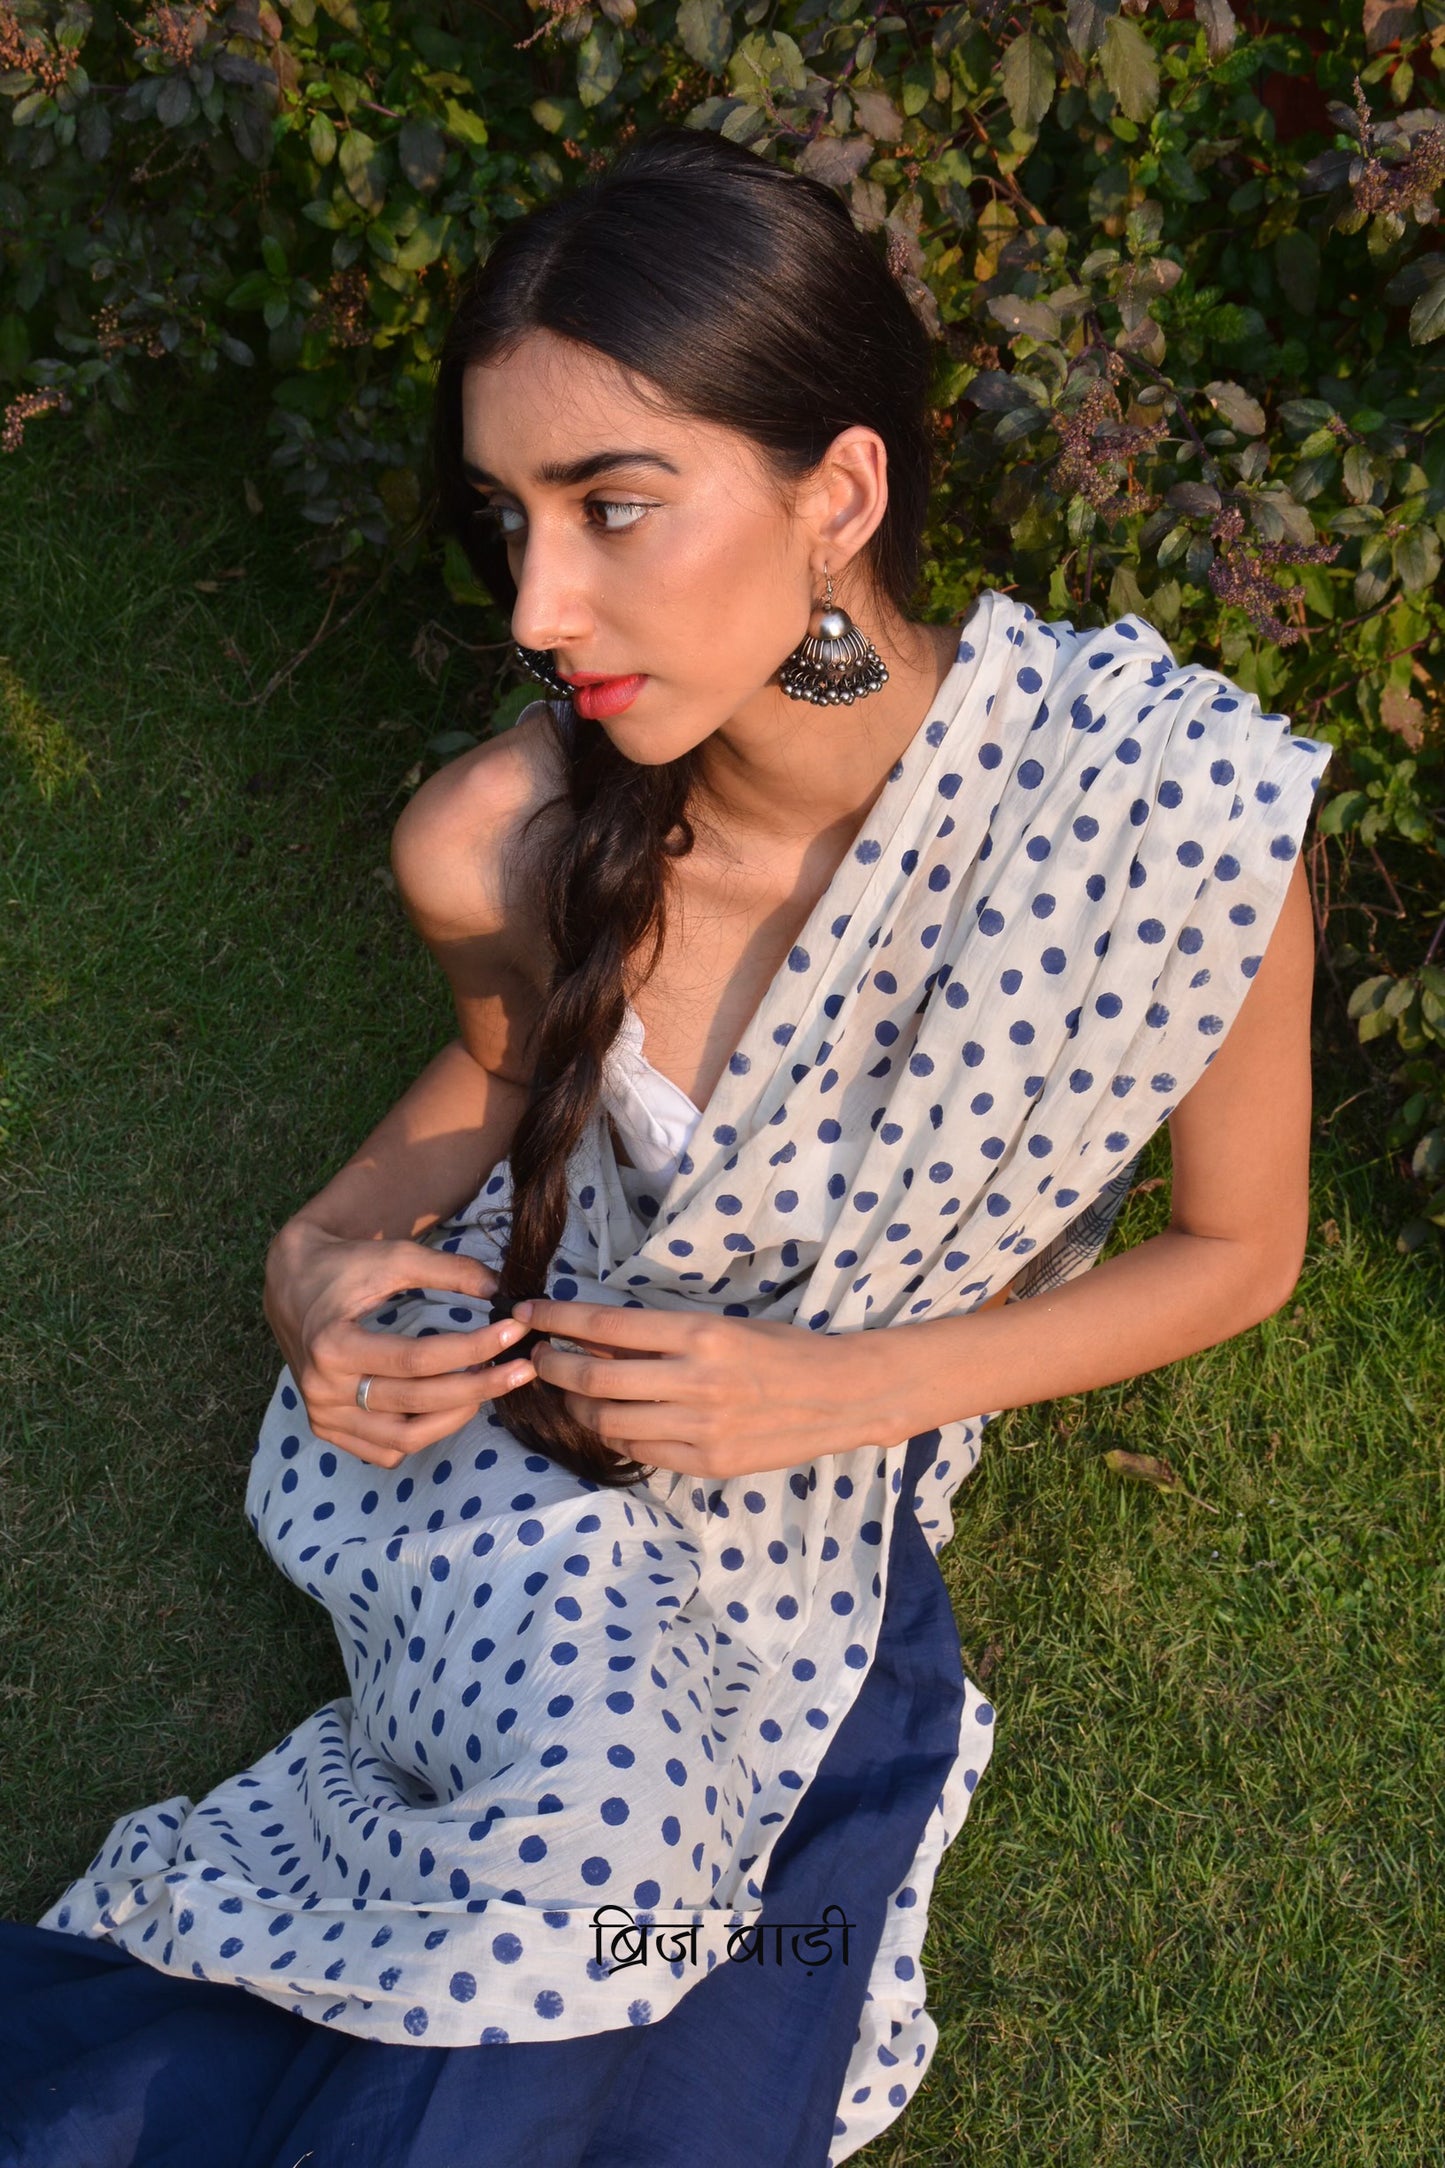 Hand Block Printed cotton mulmul blue polka dot saree for festivities, office, and daily. All day comfort and style